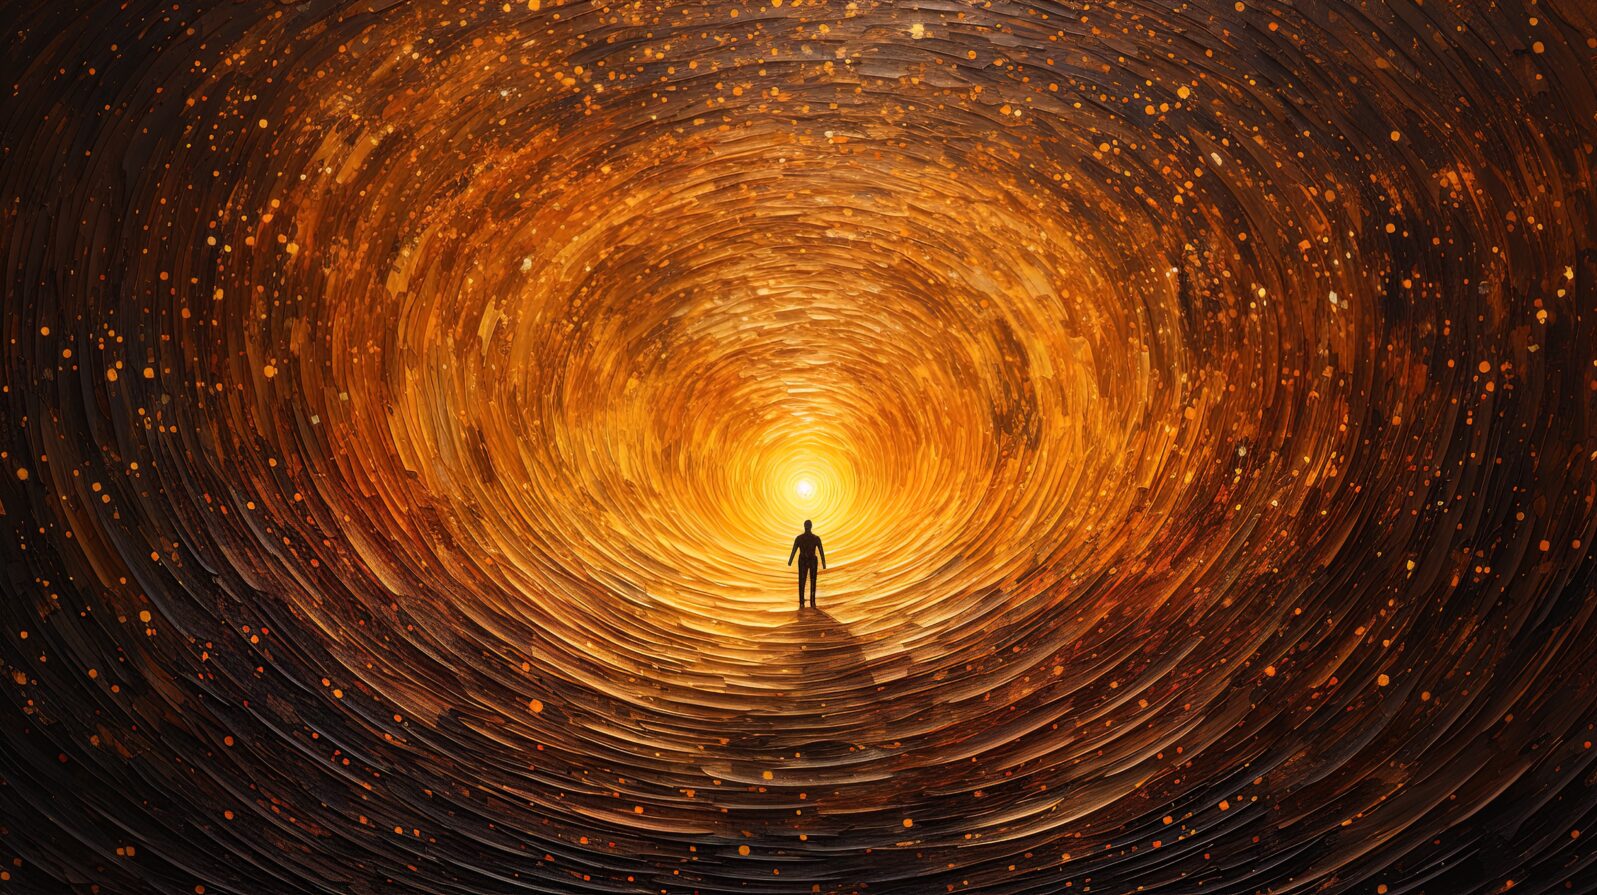 Concept tunnel of light in near death experience, soul finding their ascension, astral trip, astral projection, people going through the portal of karma, death and birth. Spirituality, esoteric.